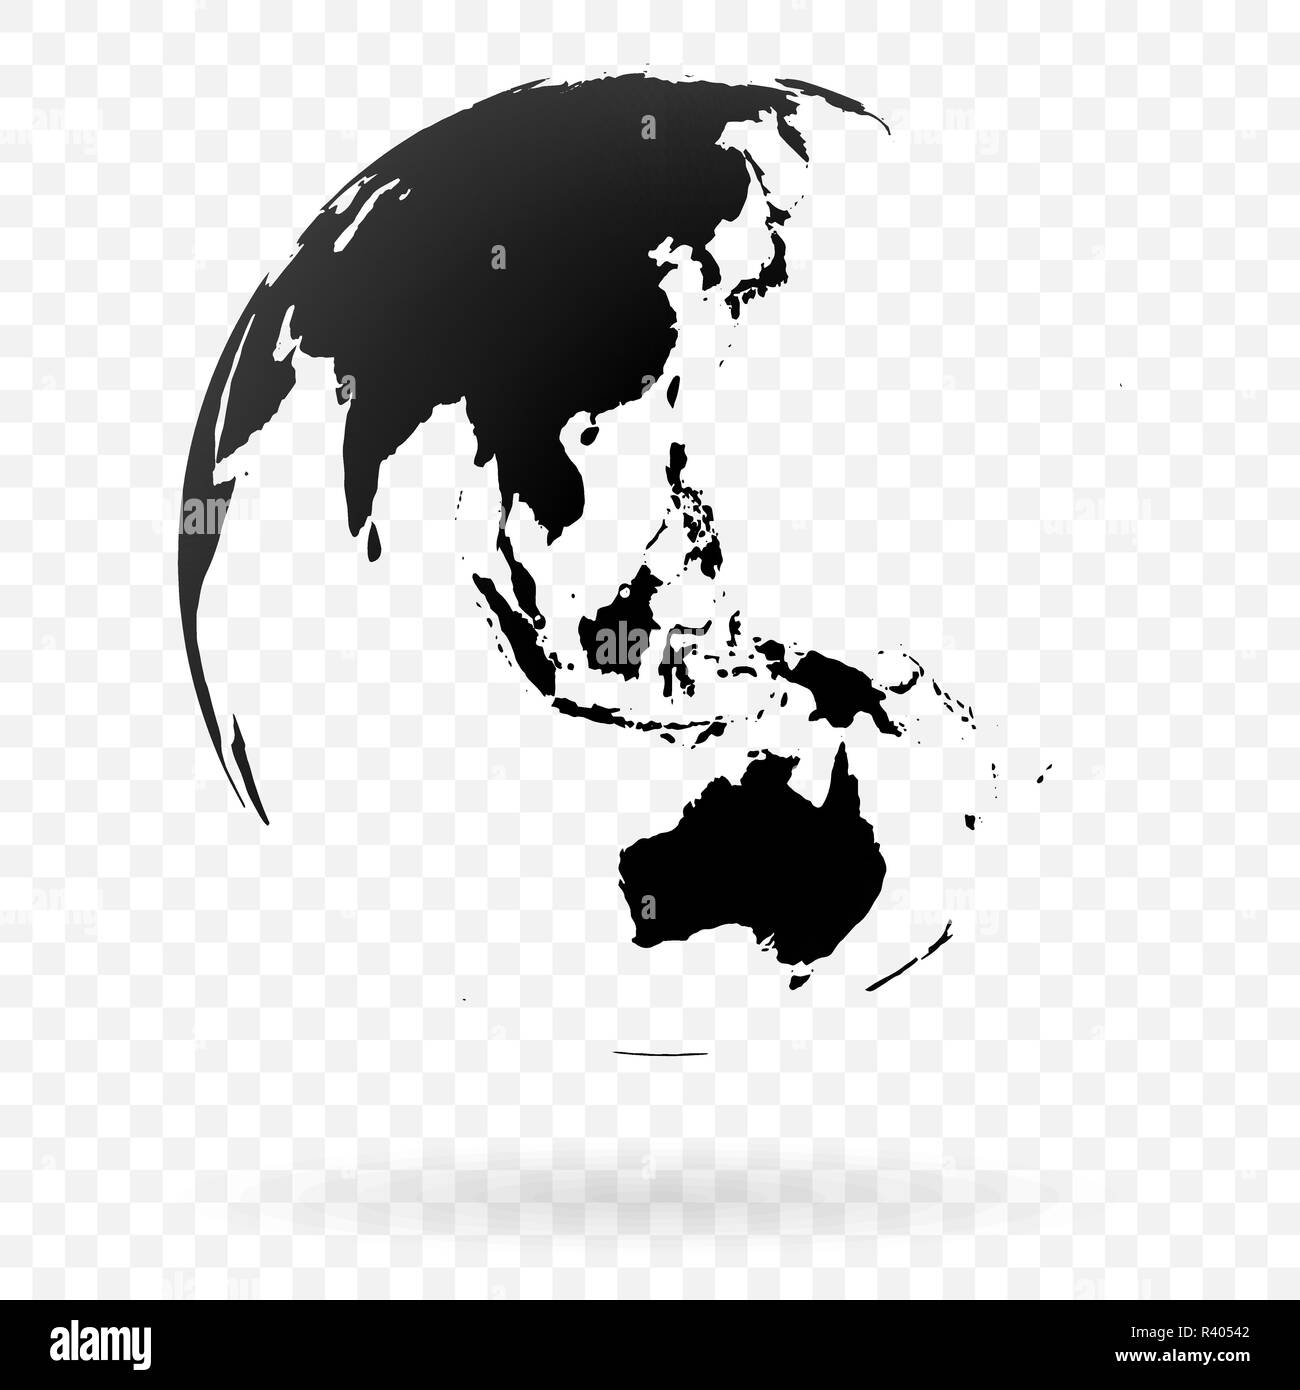 Highly detailed Earth globe symbol, Australia, Indian and Pacific oceans. Black on white background. Stock Vector